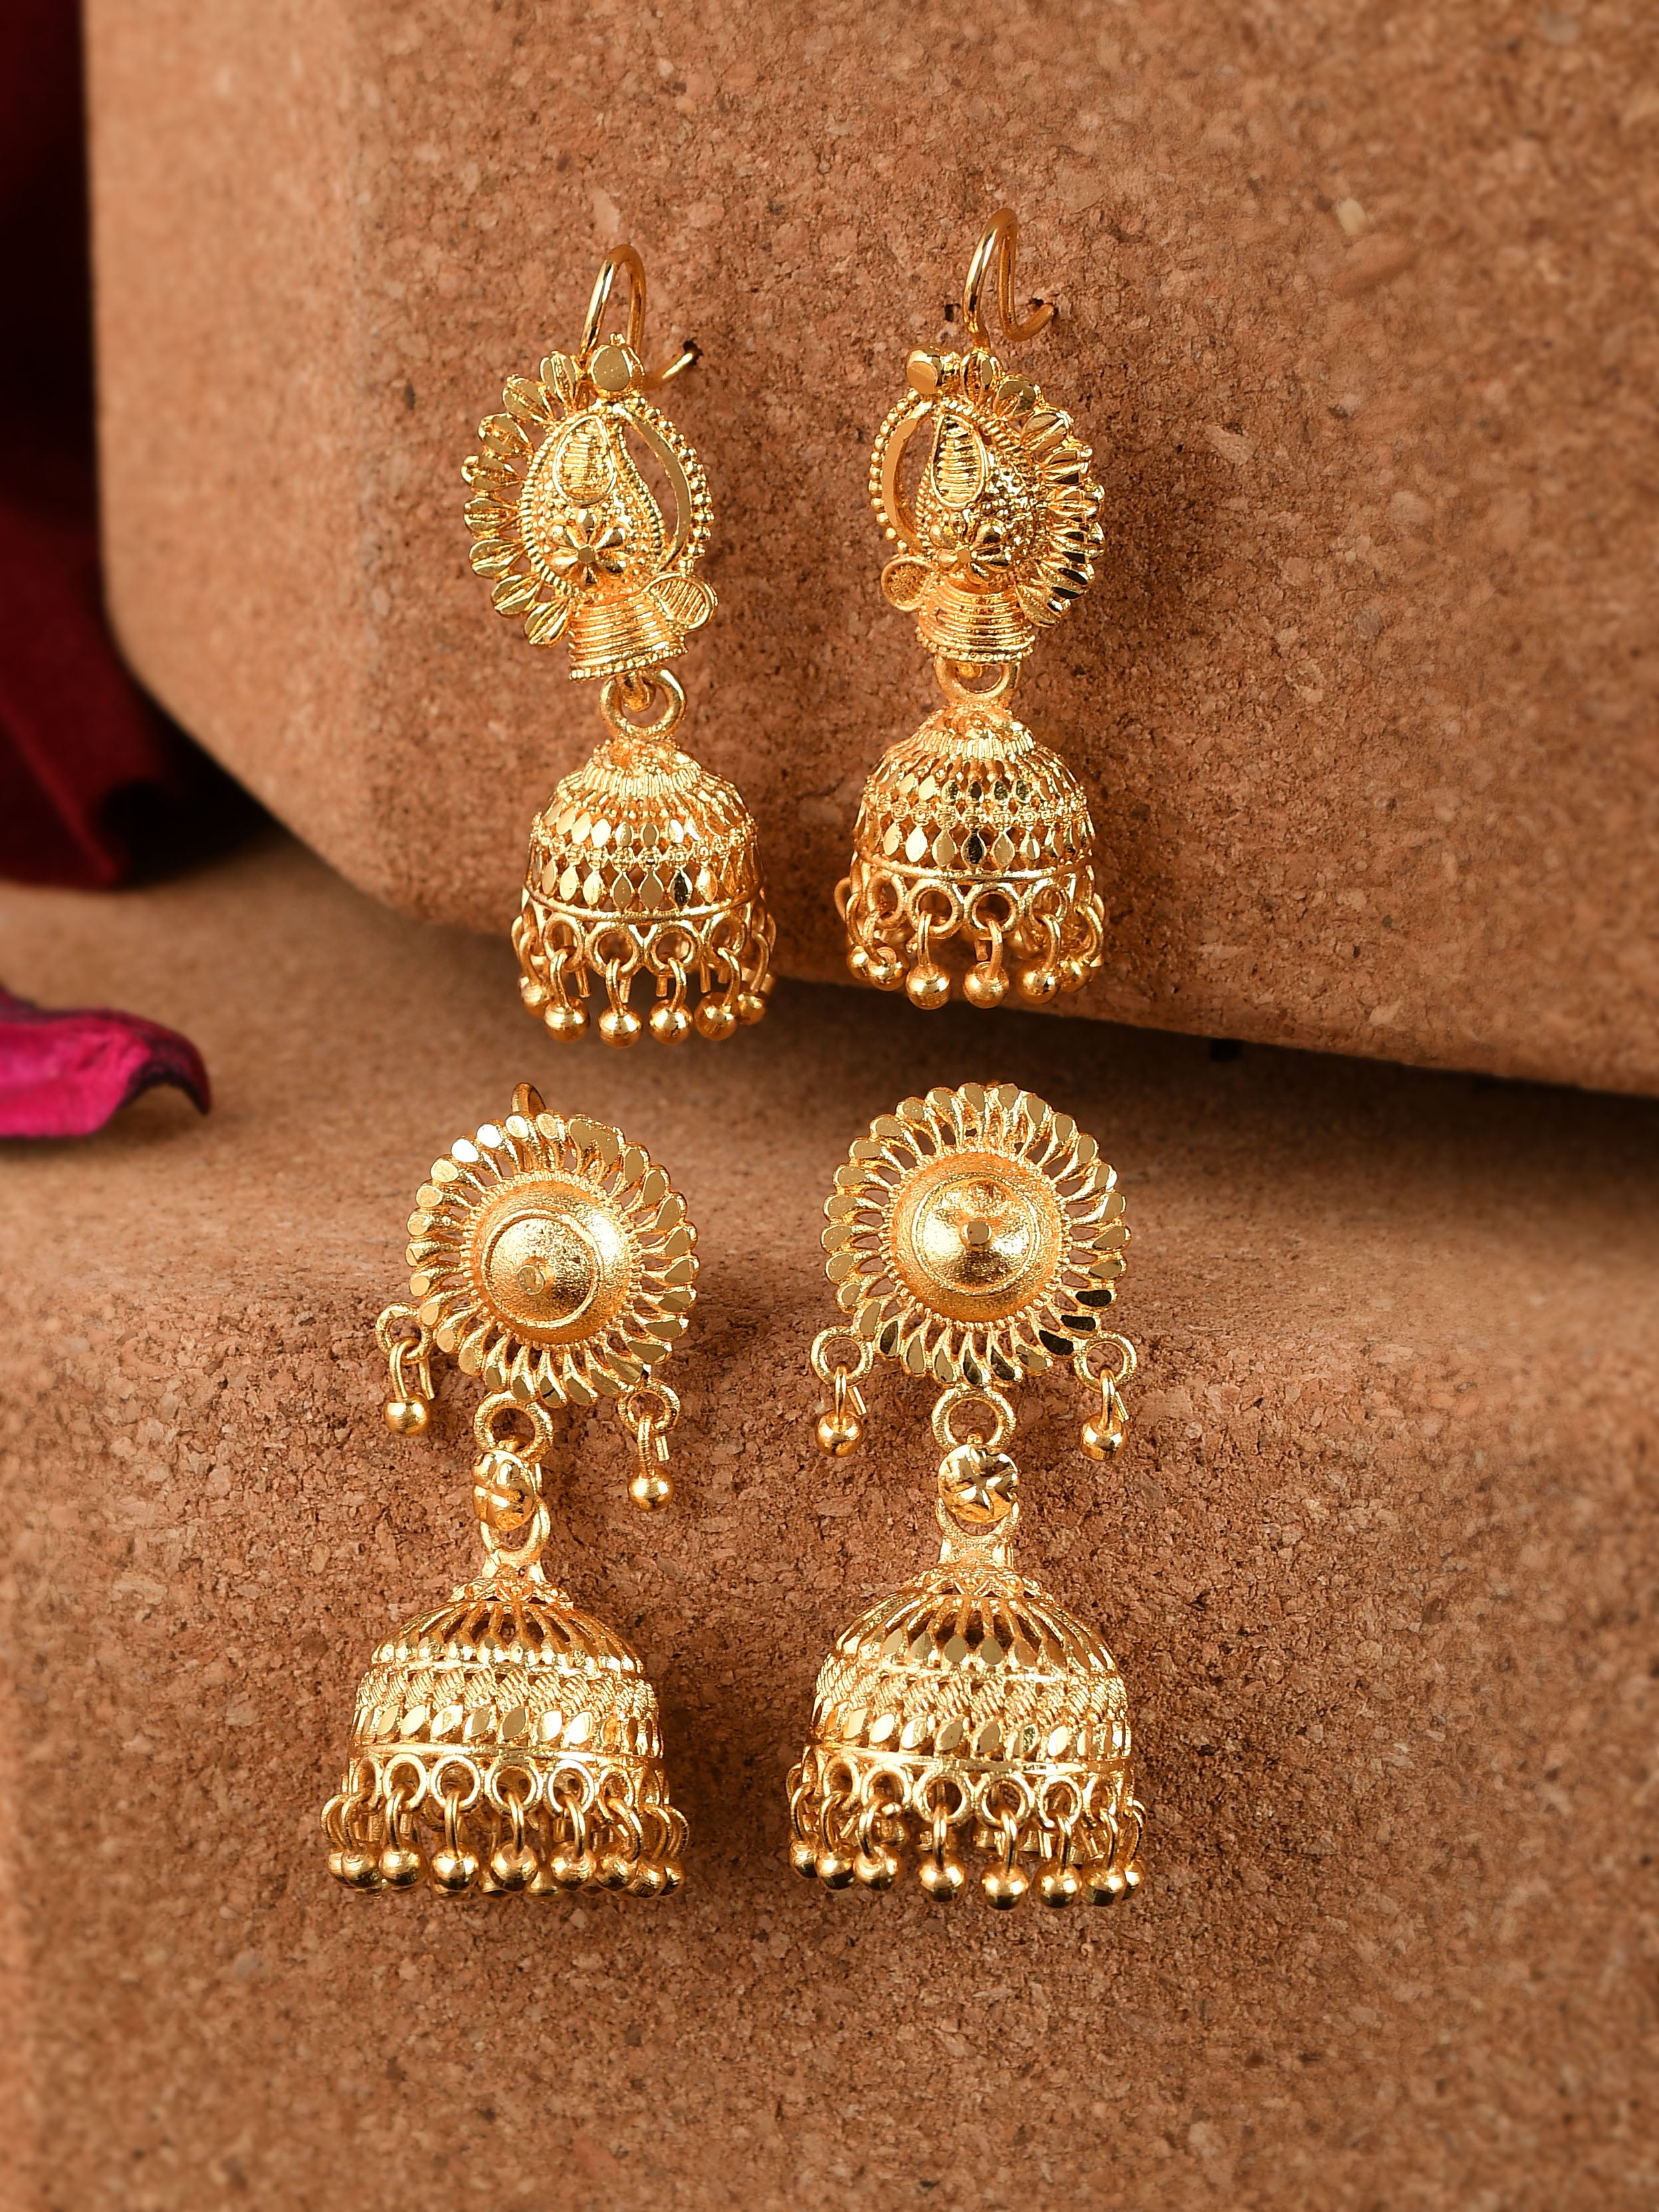 Buy Fida Gold-Plated Antique Temple Jhumki Earrings Online At Best Price @  Tata CLiQ